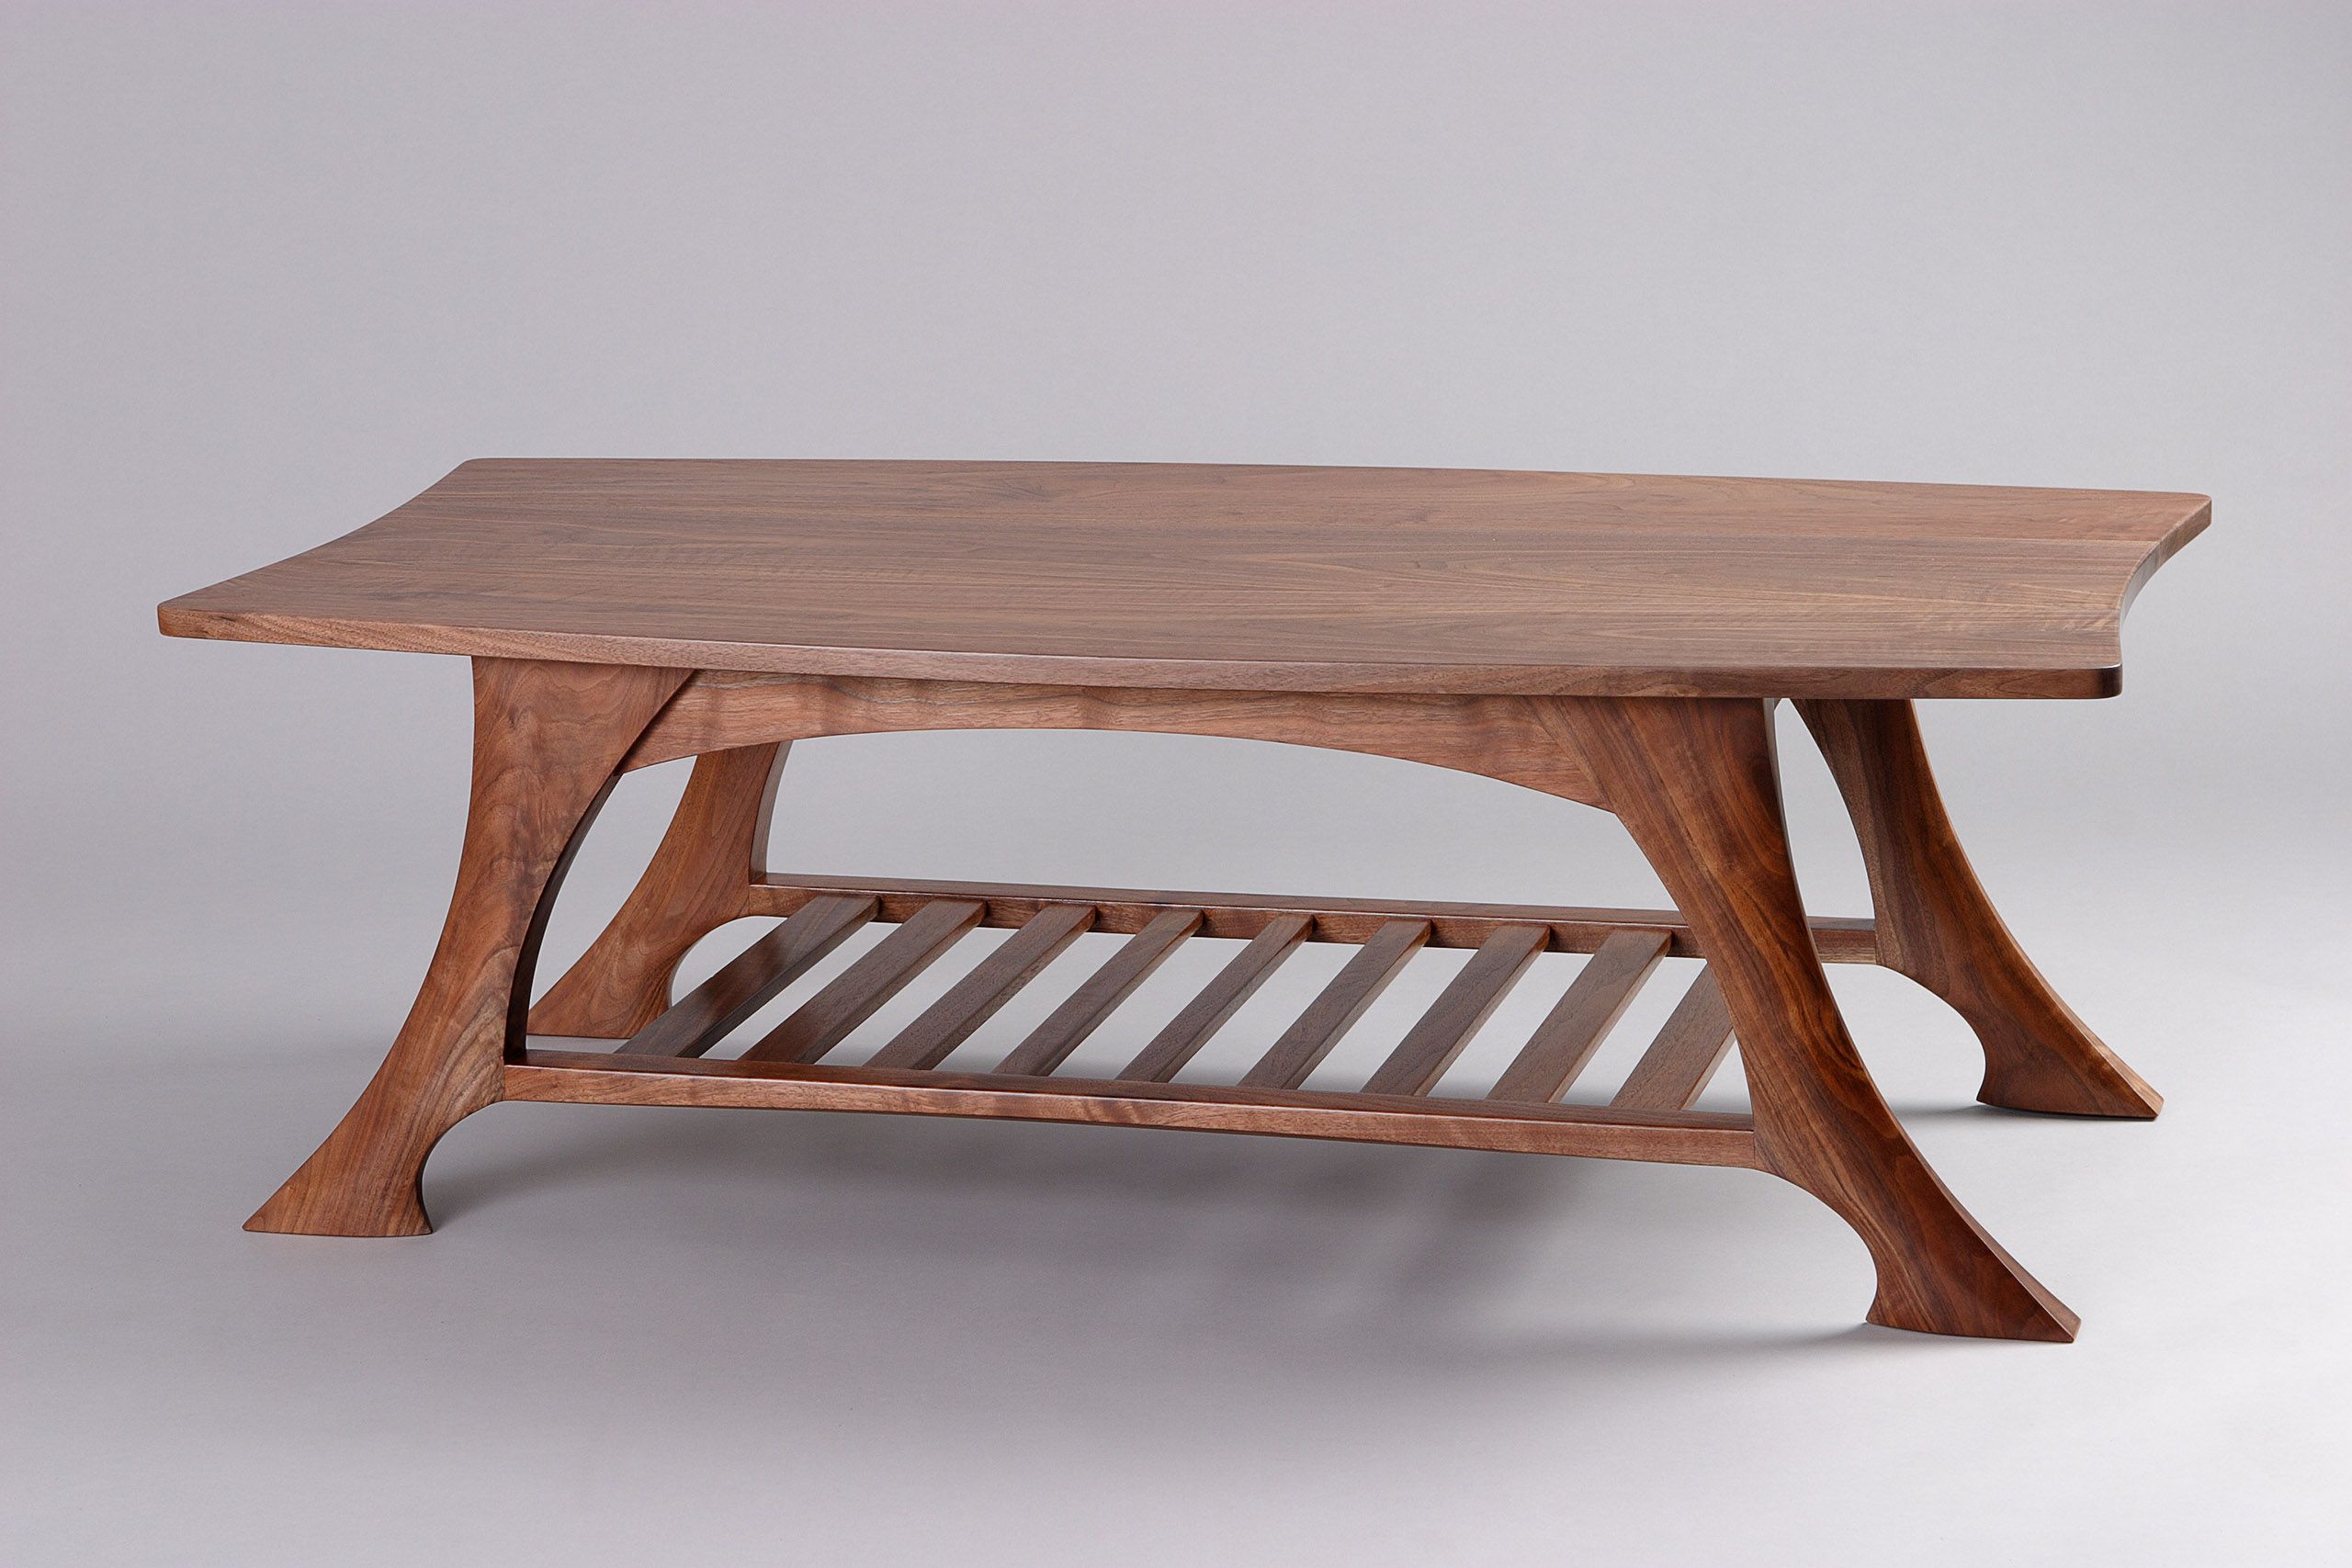 Casa Grande Coffee Table | Black Walnut Solid Wood – Seth Rolland With Regard To Coffee Tables With Solid Legs (View 8 of 15)